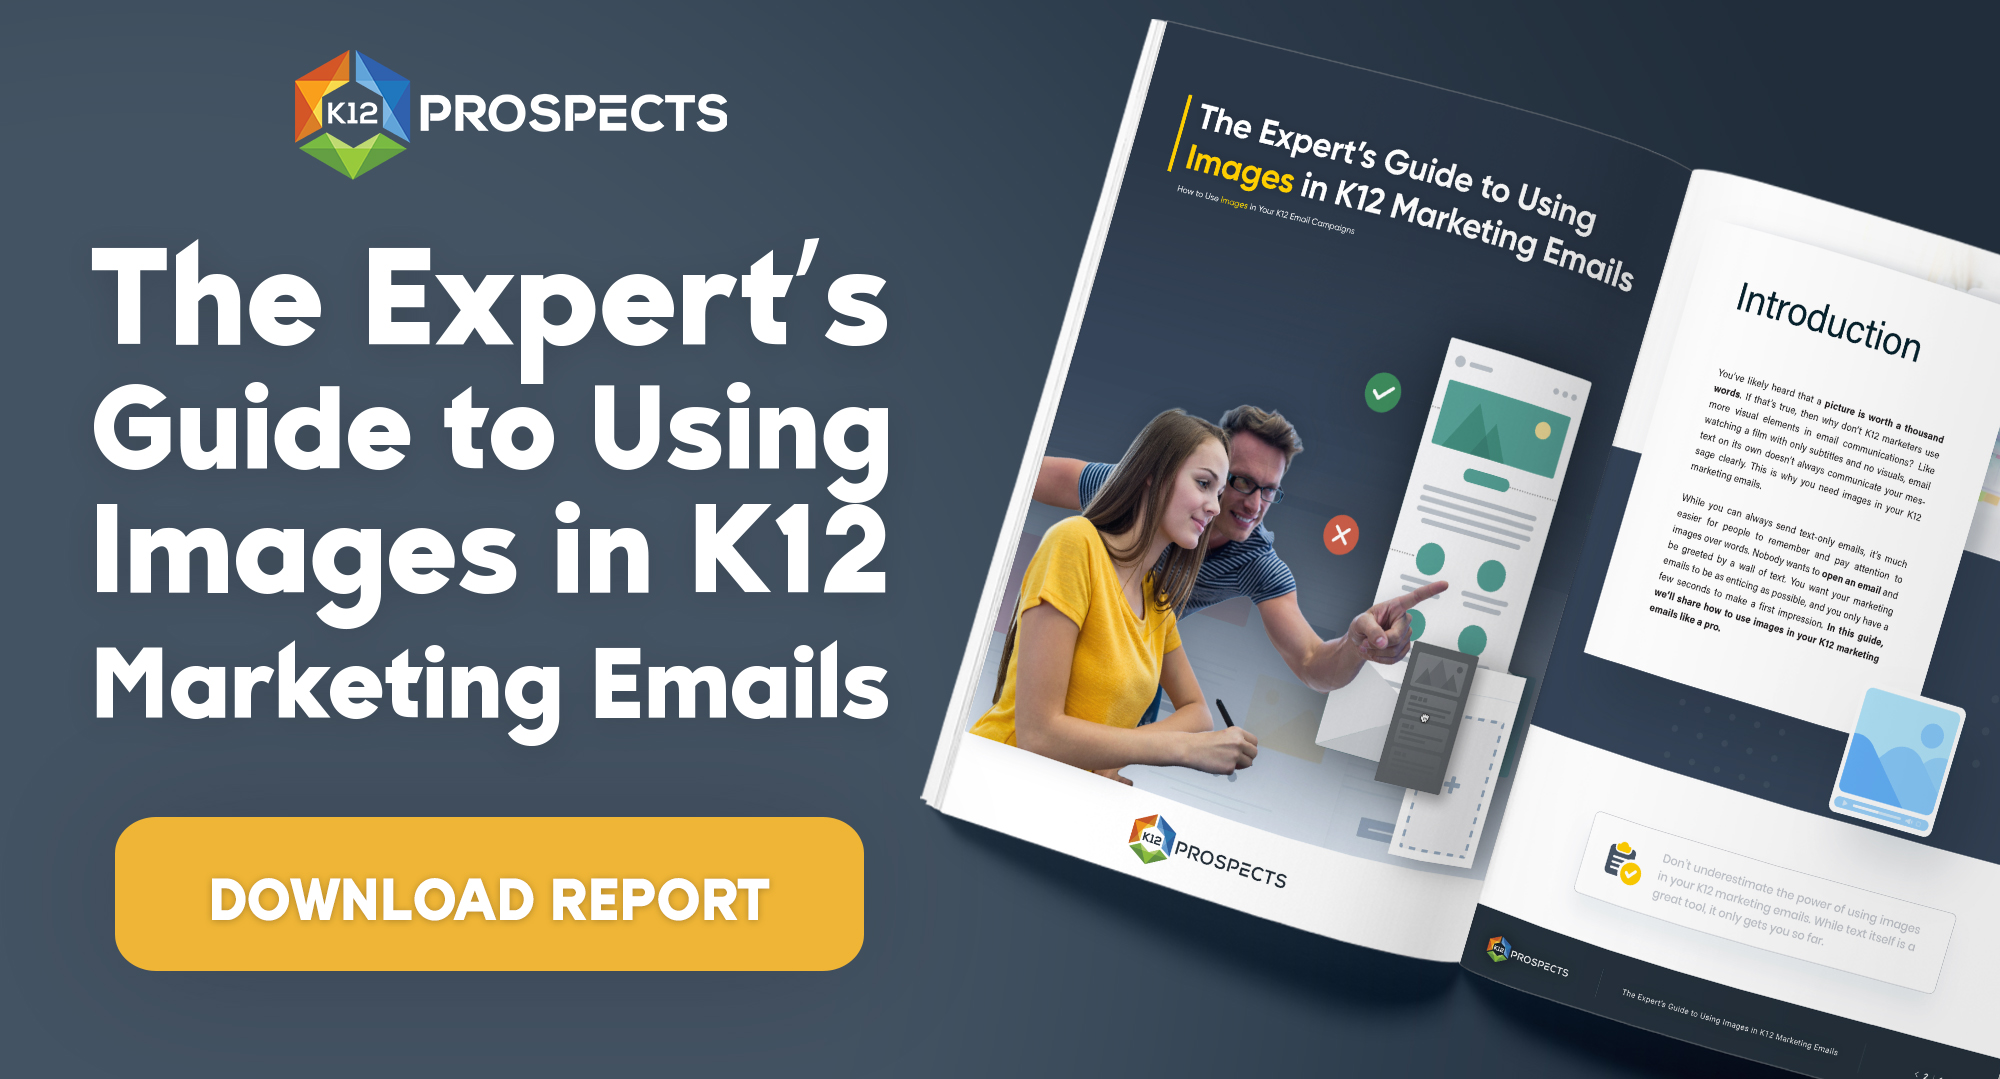 CTA The Expert Guide to Using Images in K12 Marketing Emails